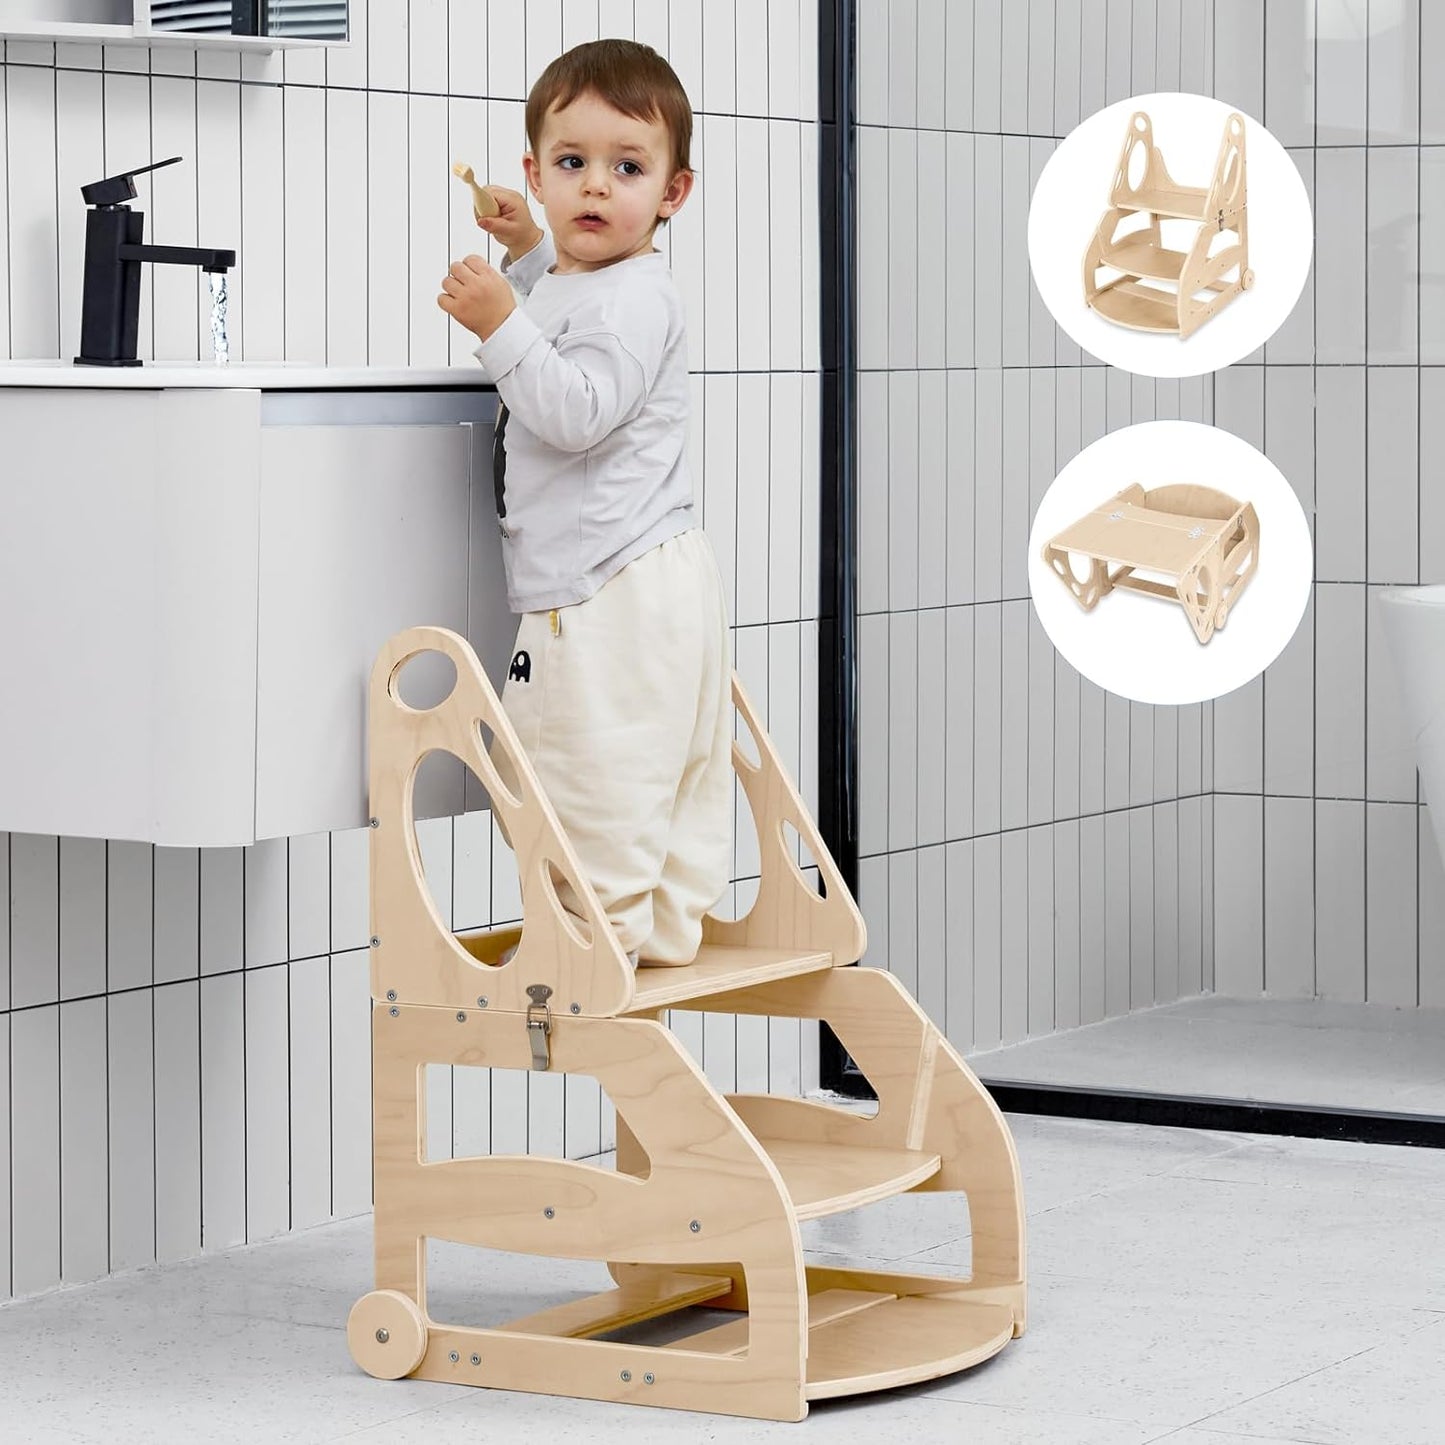 Toddler Step Stool, 2 in 1 Wooden Step Stool for Toddler, Adjustable Toddler Step Stool with Handles and Wheels, Convertible Kids Table and Stool Set